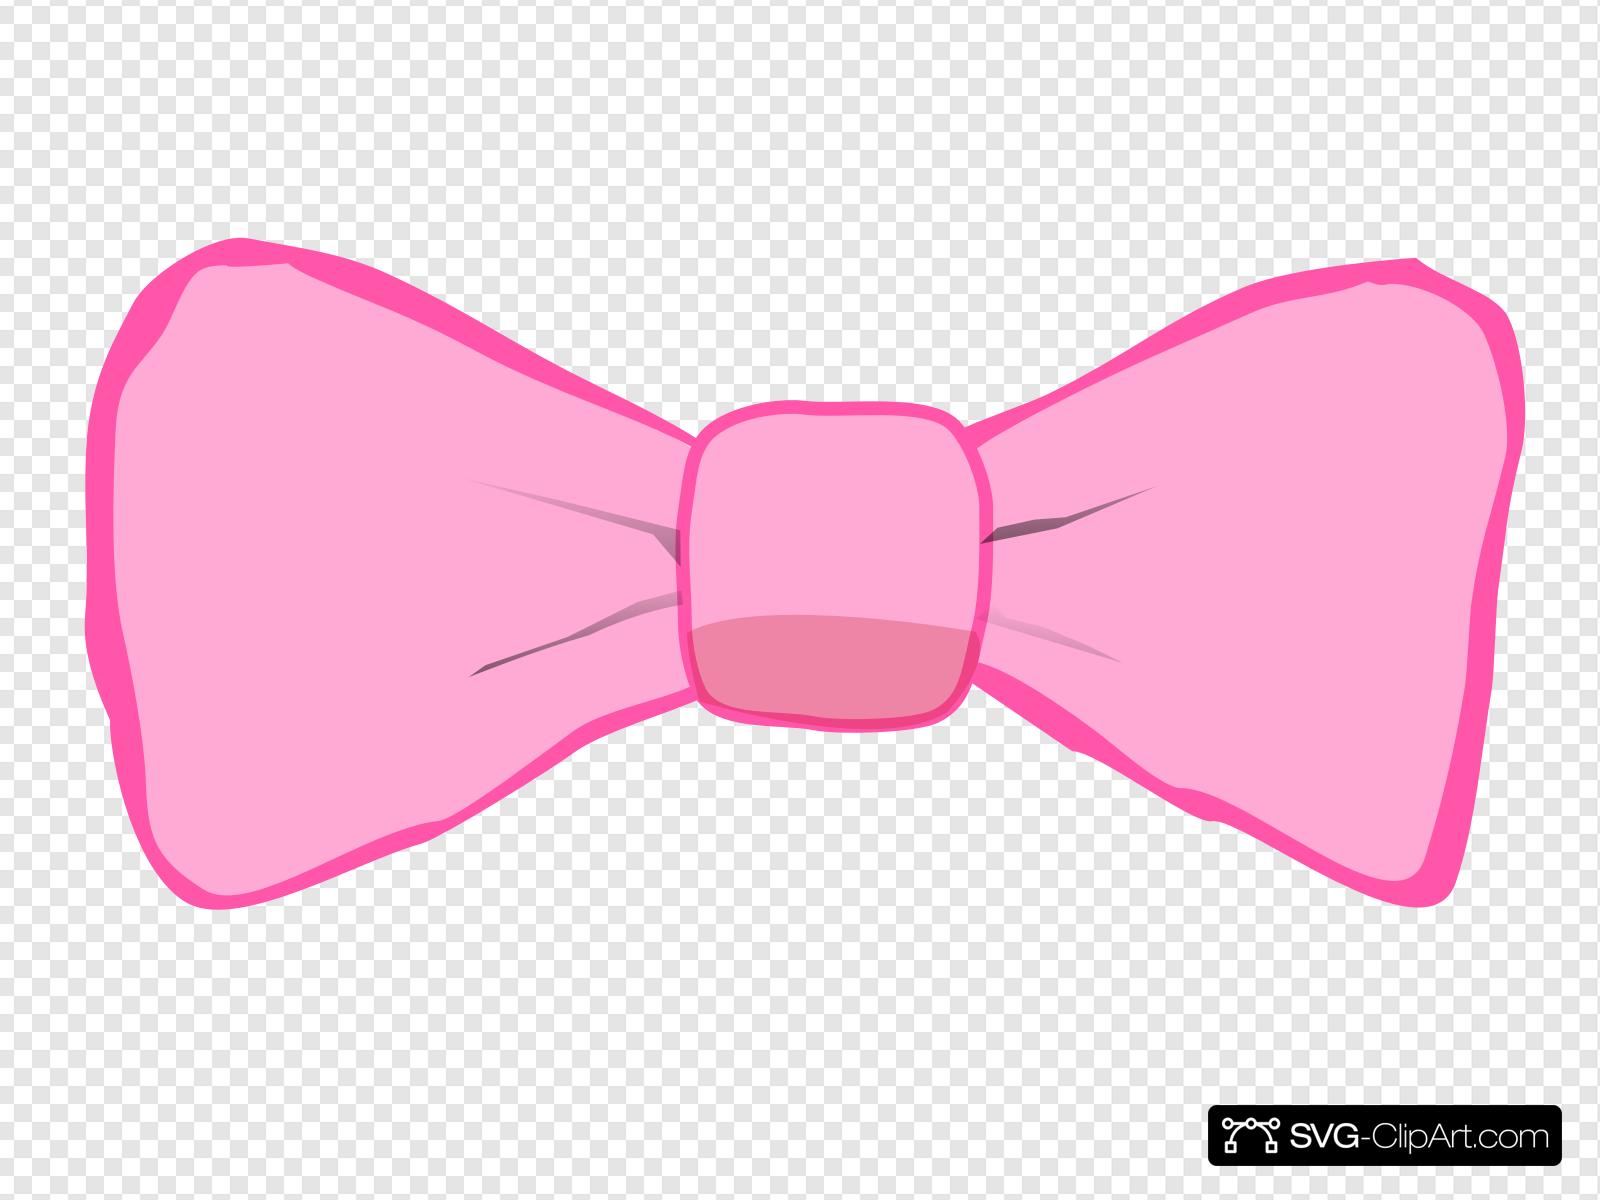 Pink On Pink Bow Clip art, Icon and SVG